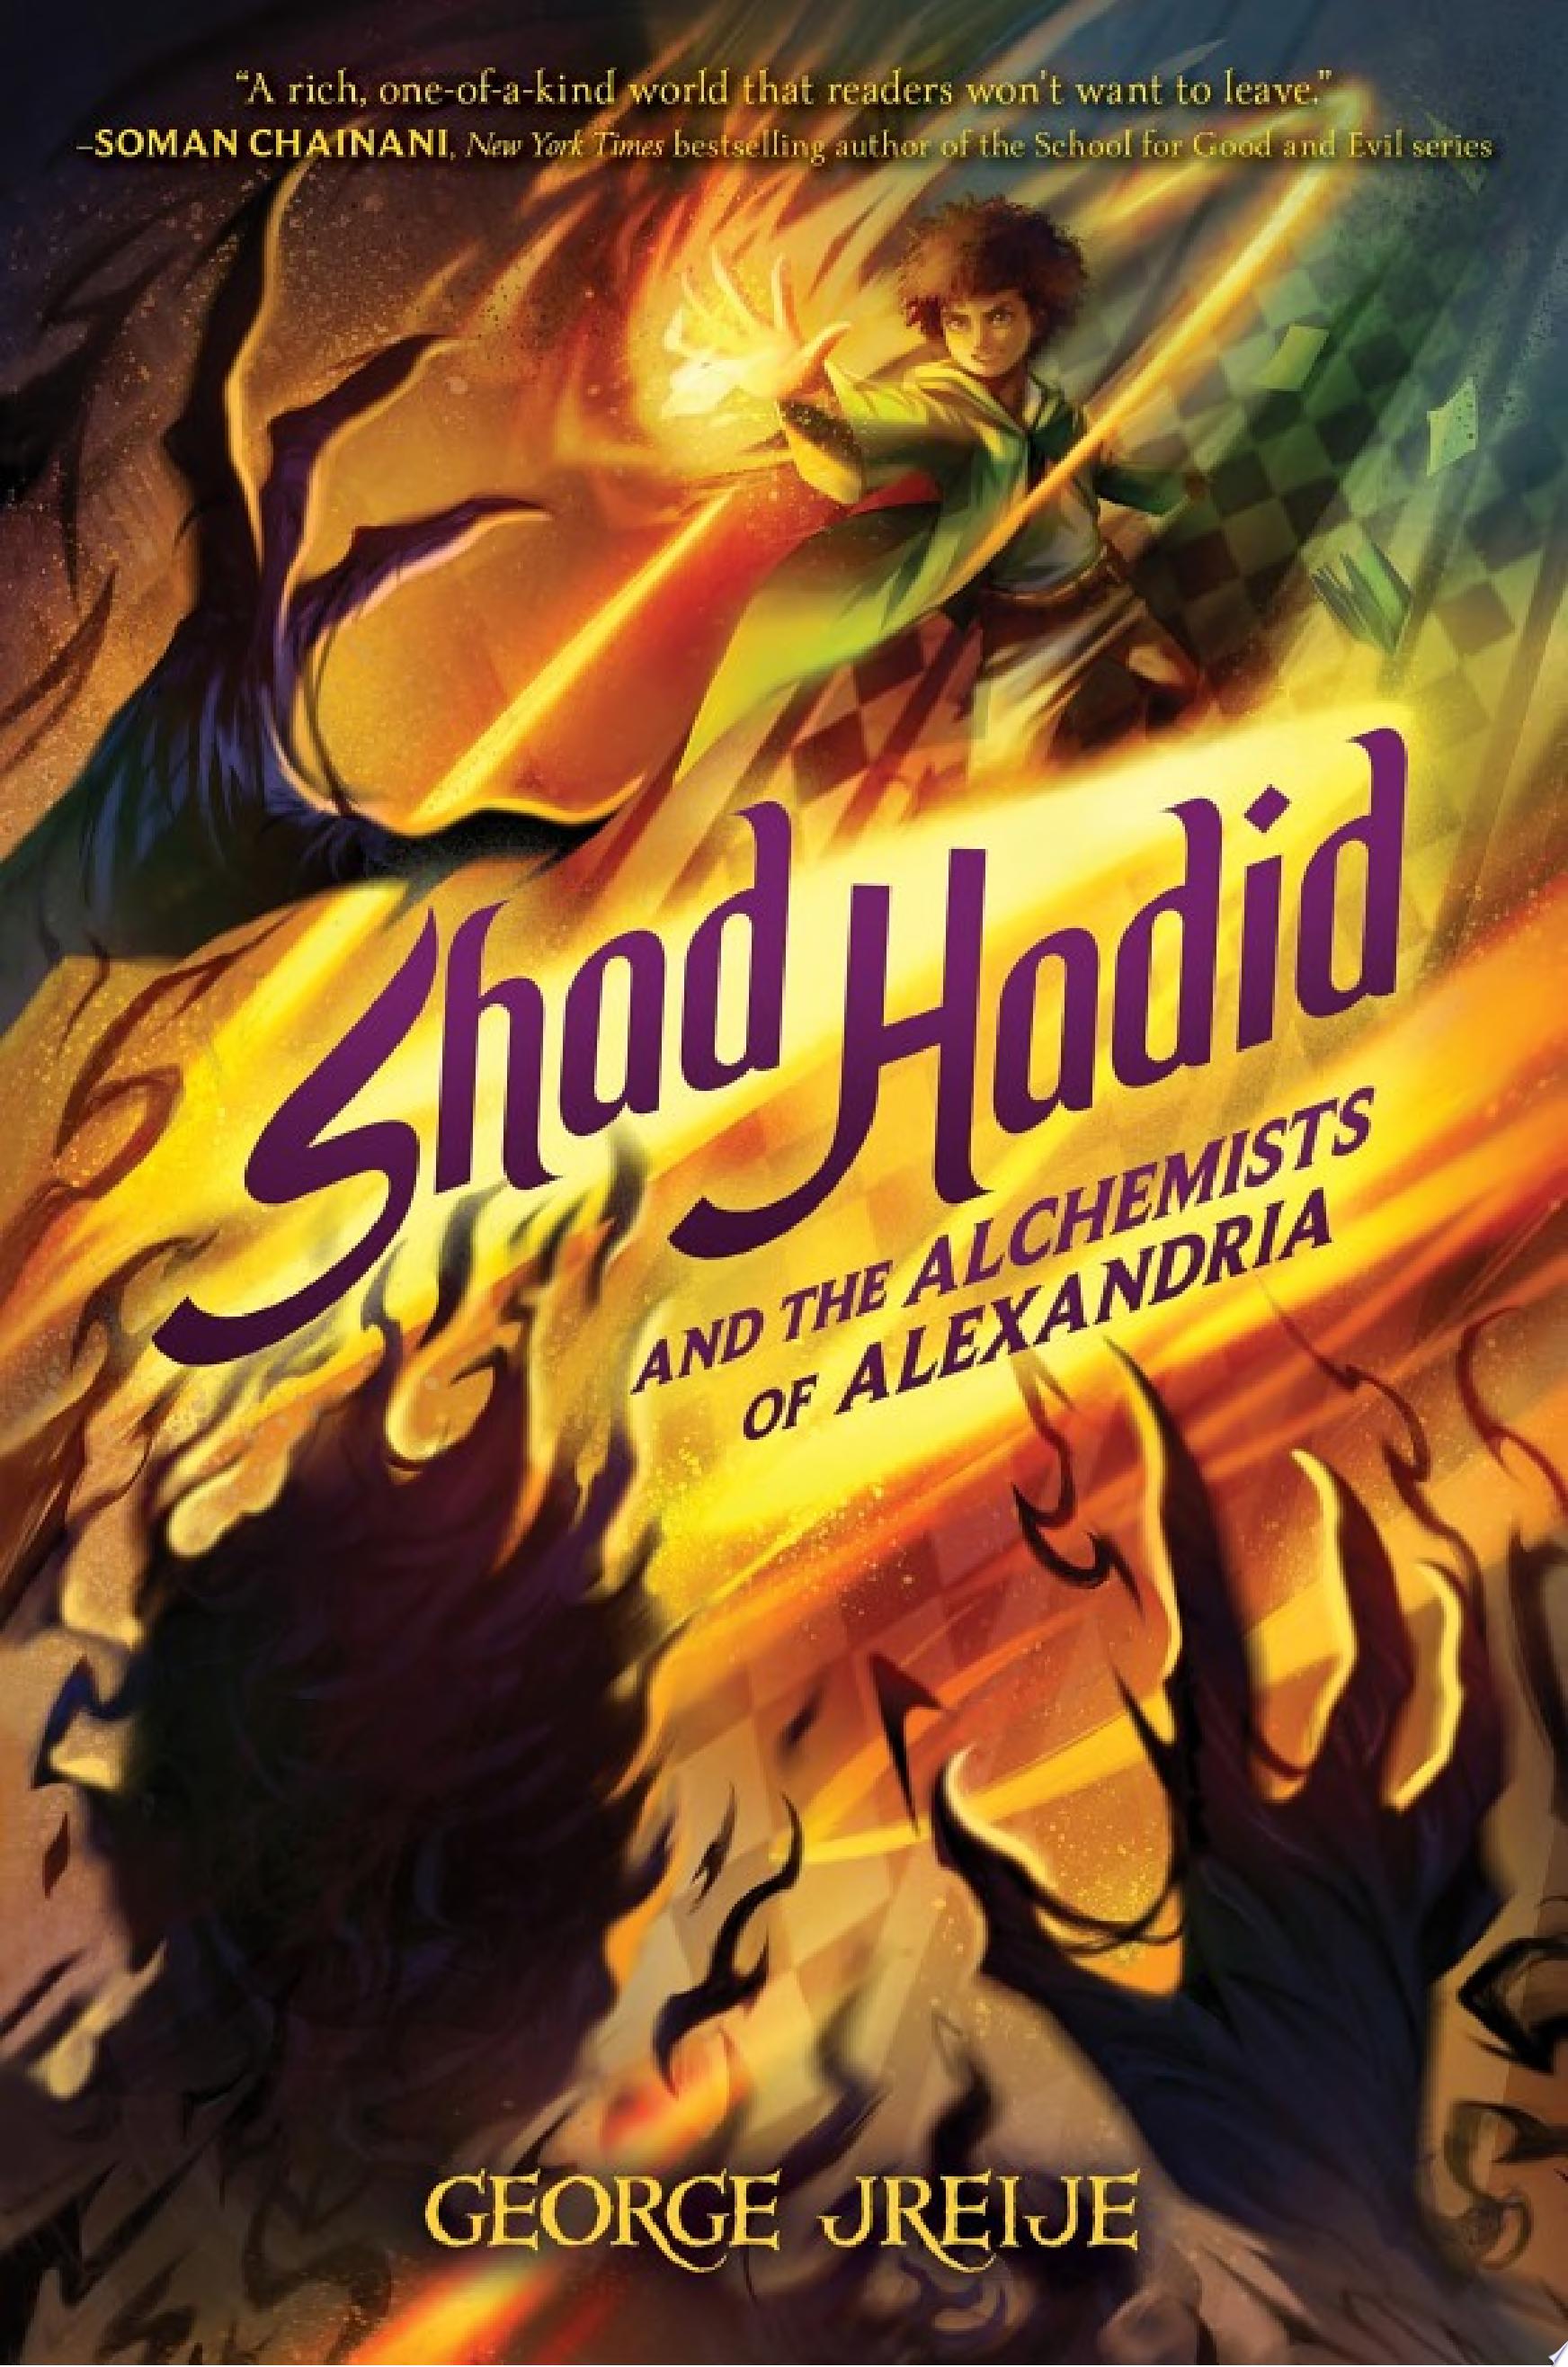 Image for "Shad Hadid and the Alchemists of Alexandria"